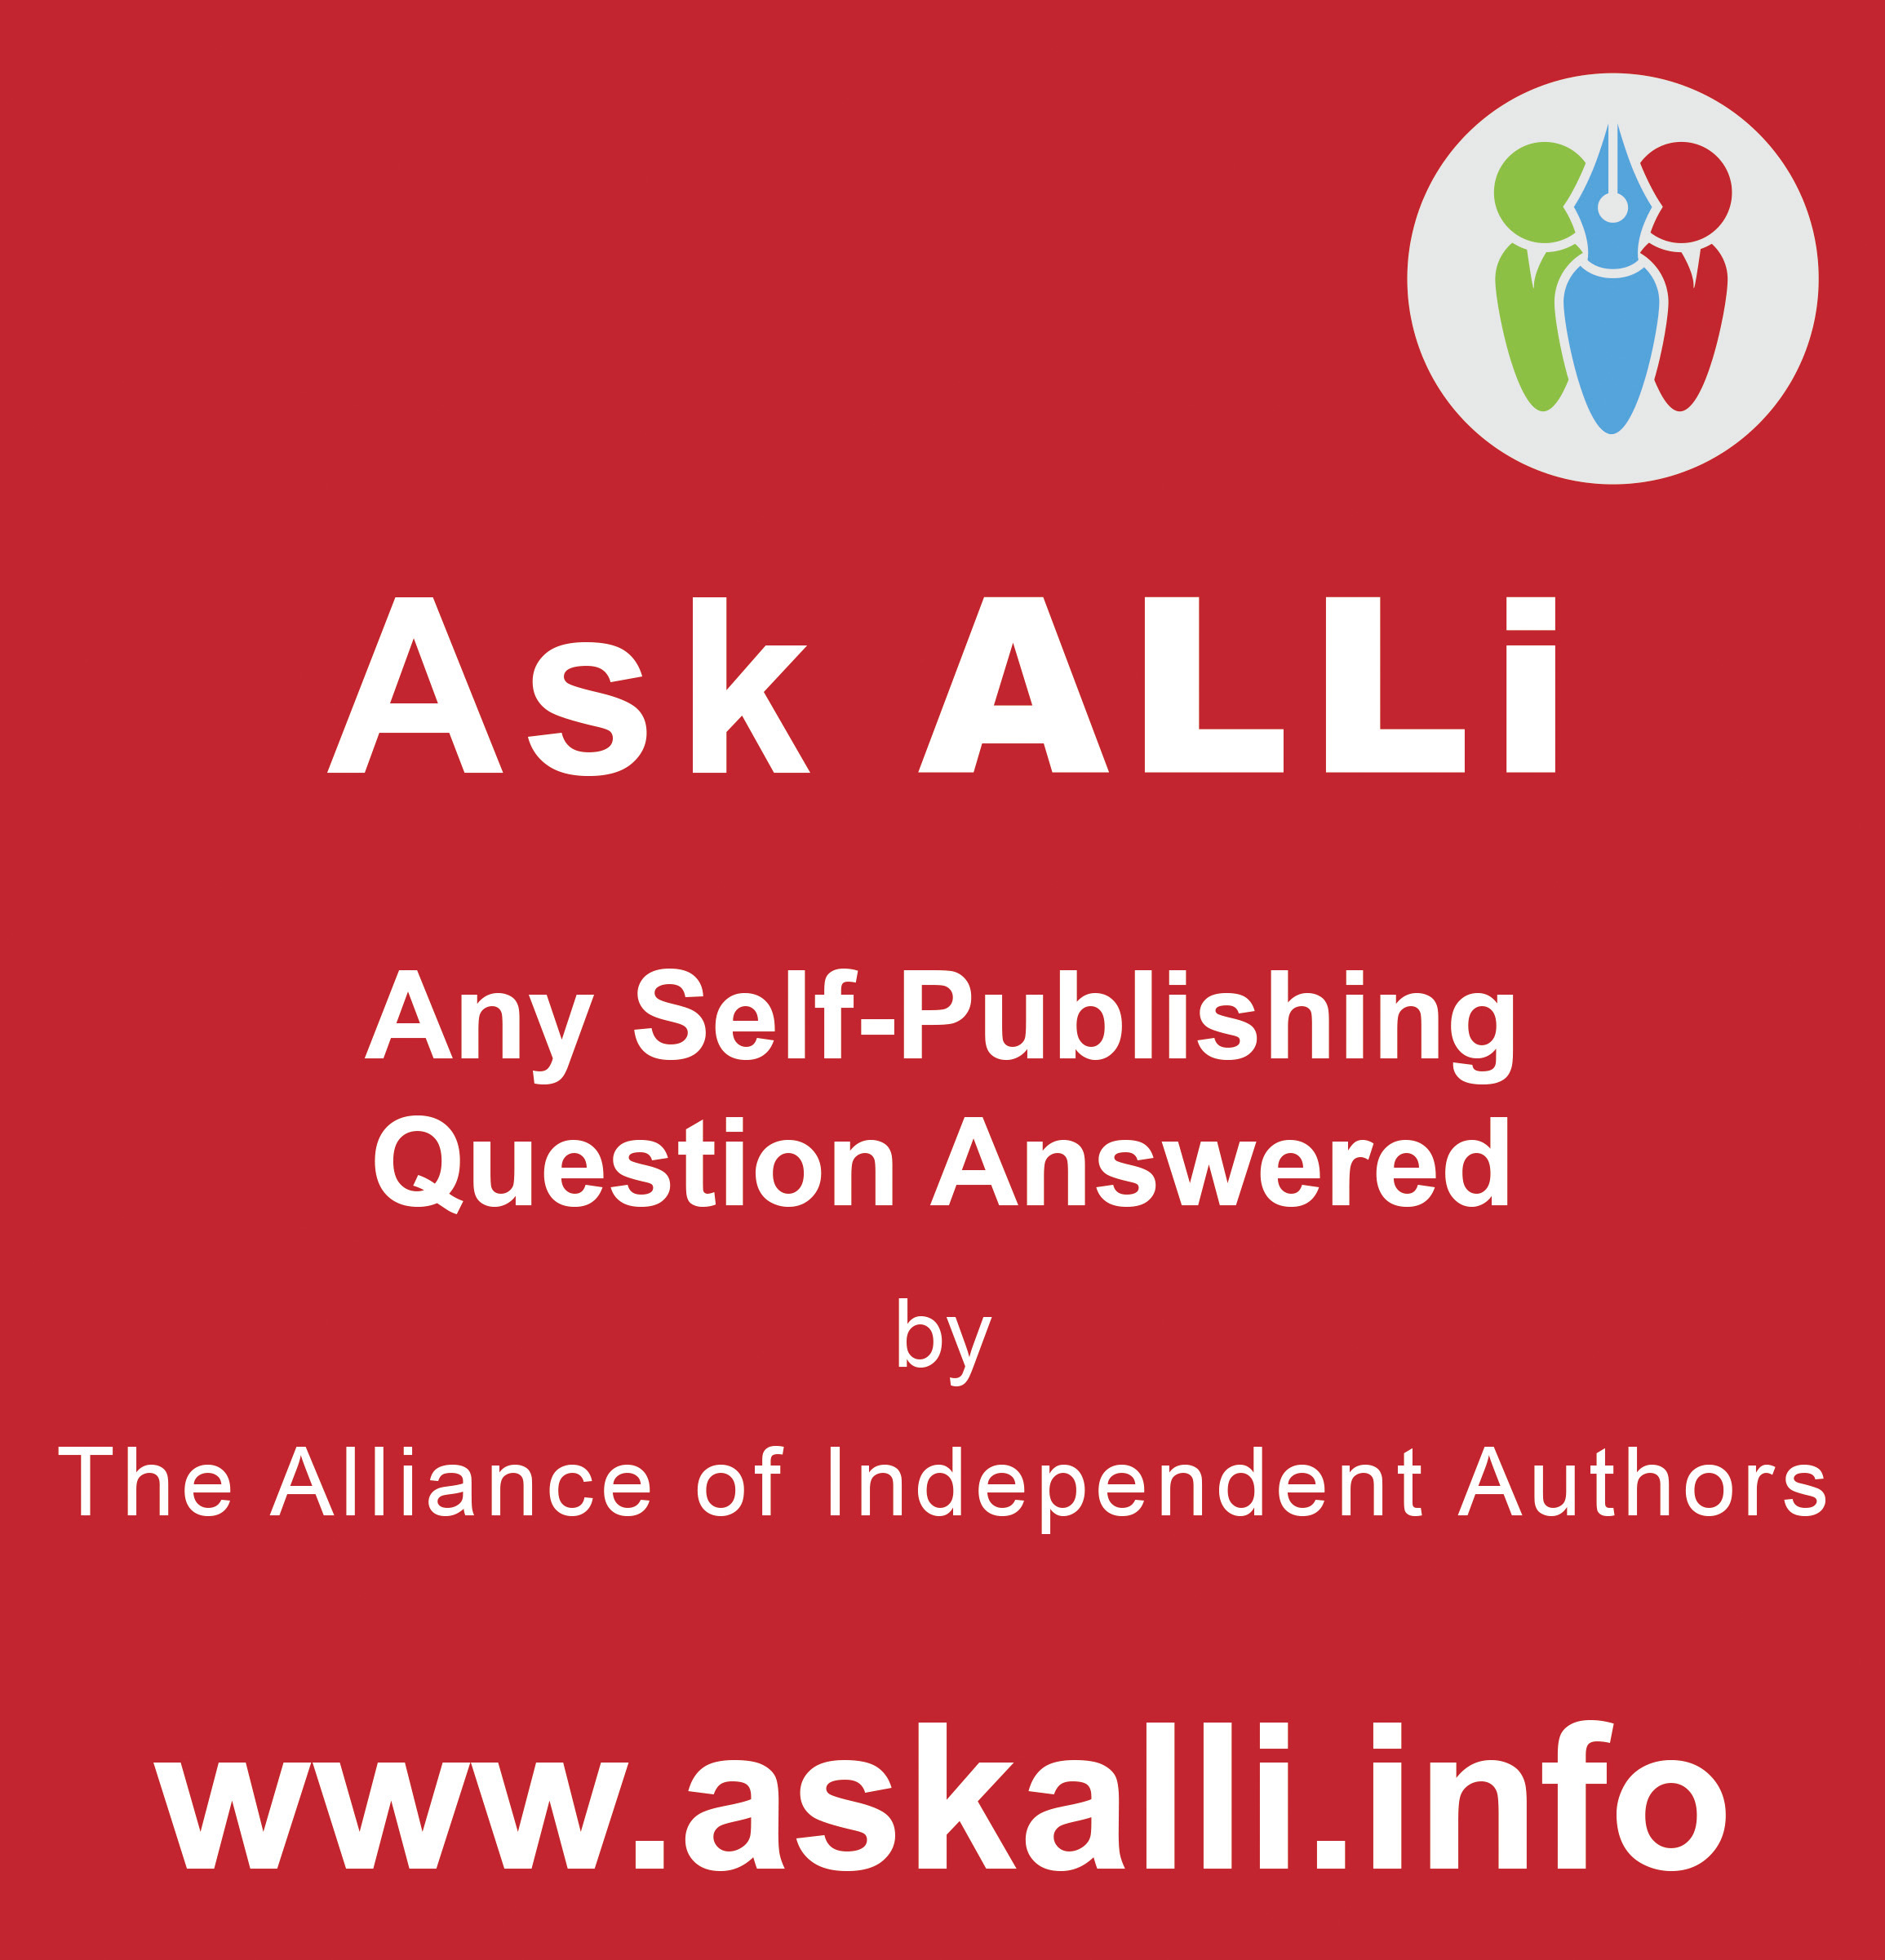 Ask ALLi Self-Publishing Member Q&A With Orna Ross & Paul Teague